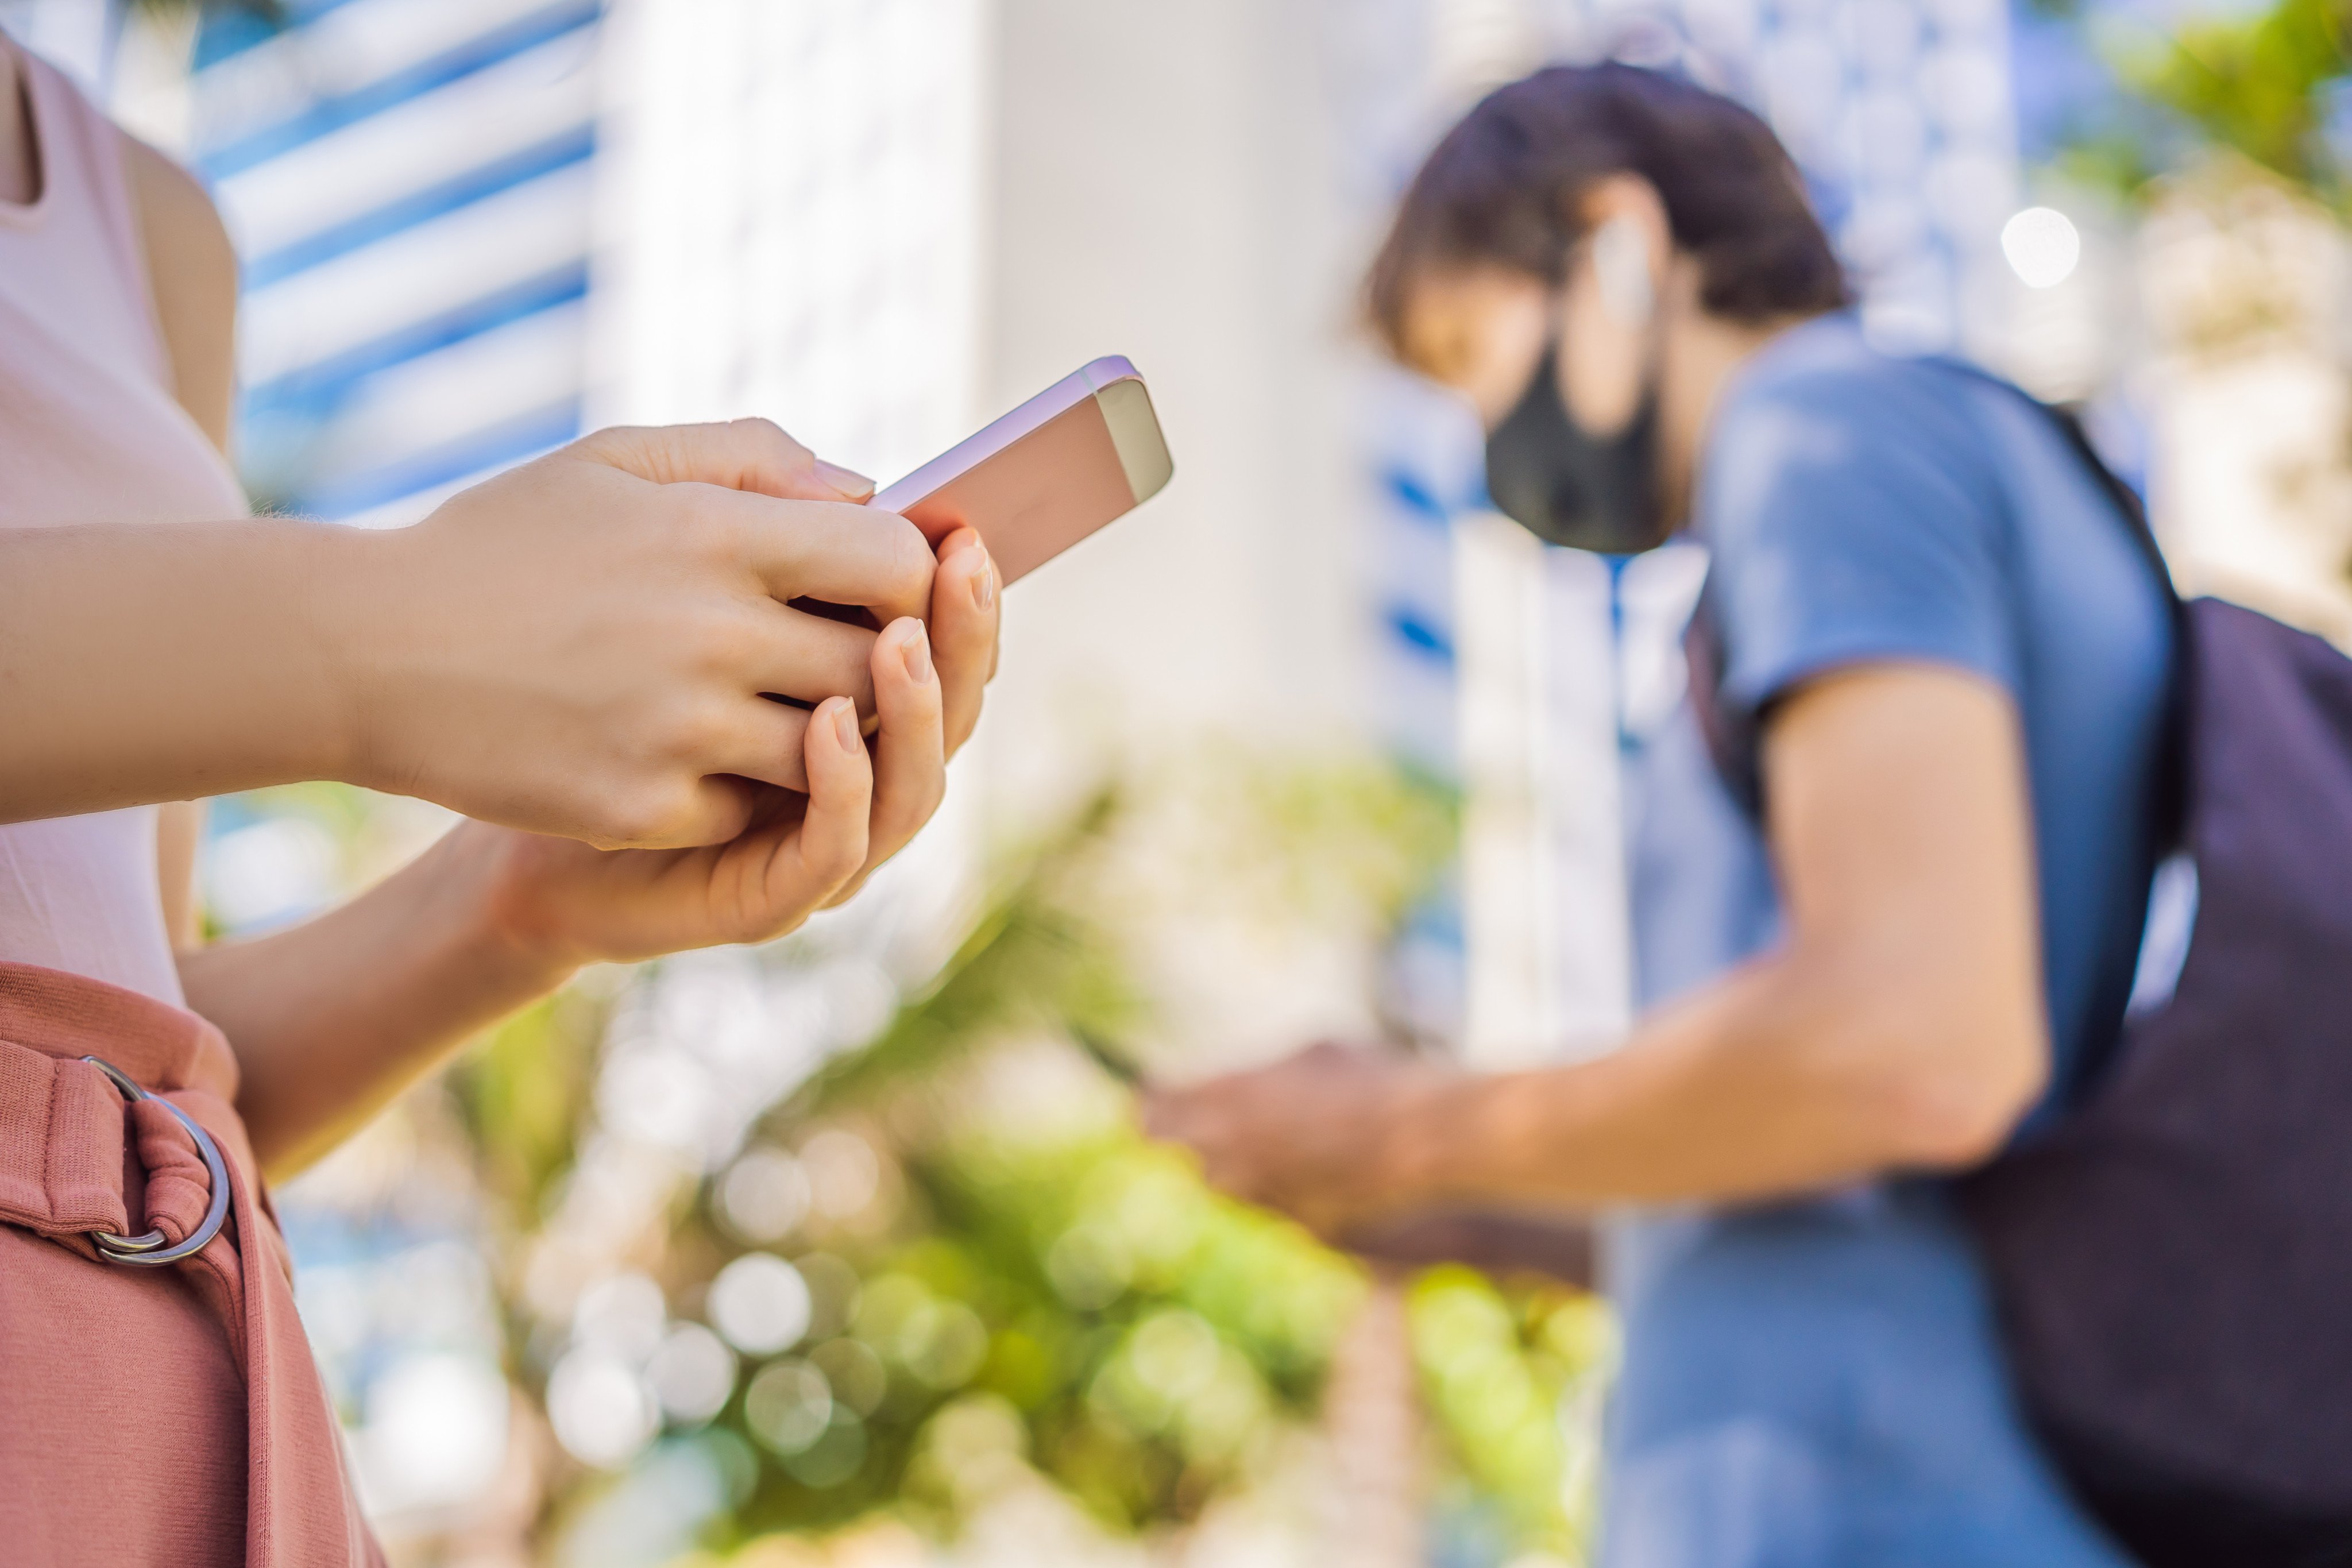 Covid-19 tracking and contact-tracing apps have become essential for many people to have on their smartphones to safely carry on outside their homes. Photo: Shutterstock